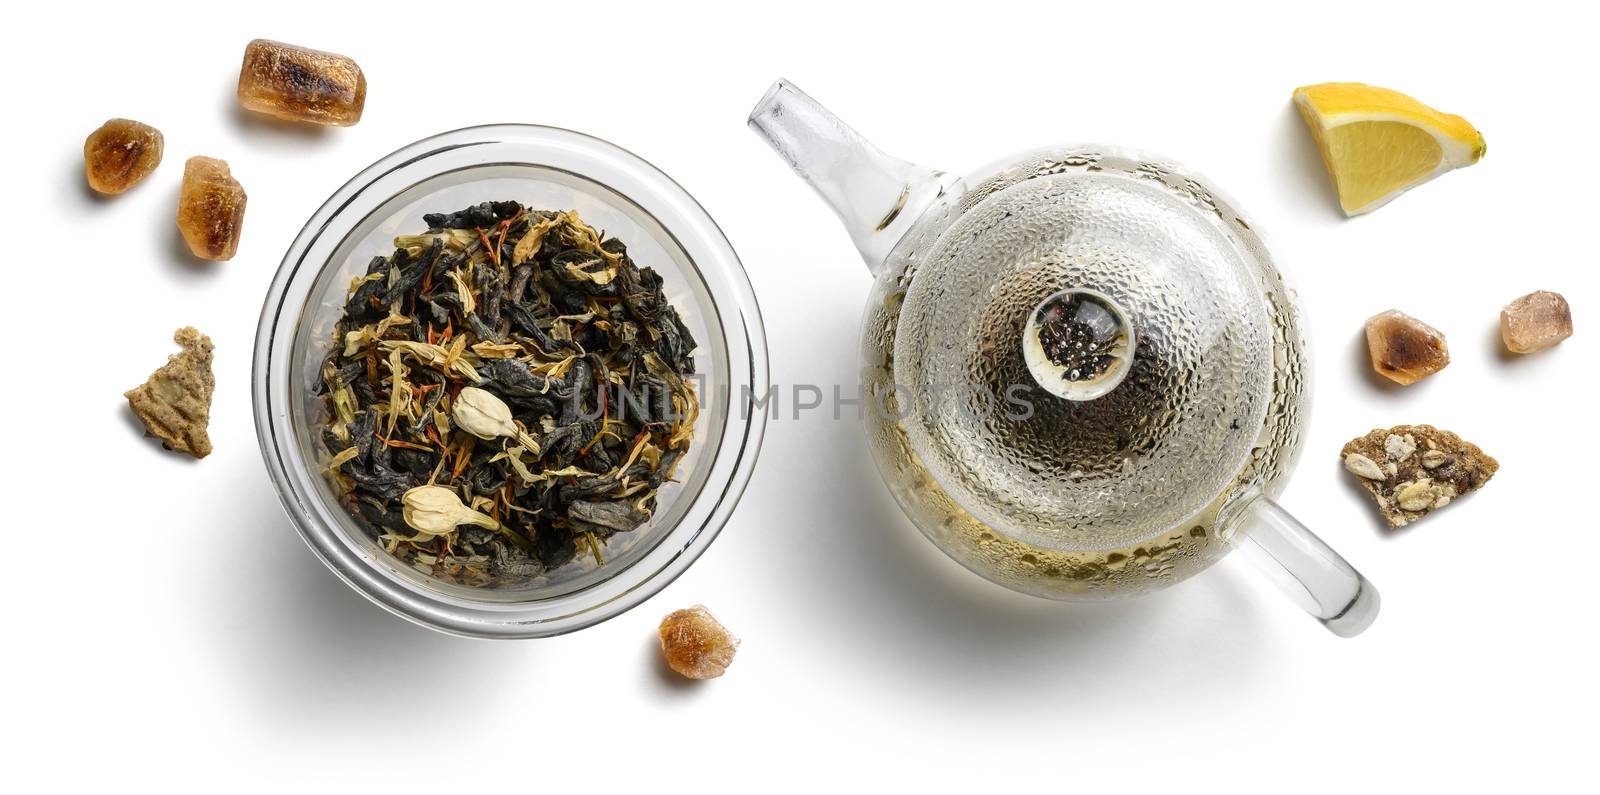 Green tea with natural aromatic additives and a teapot. Top view on white background by butenkow